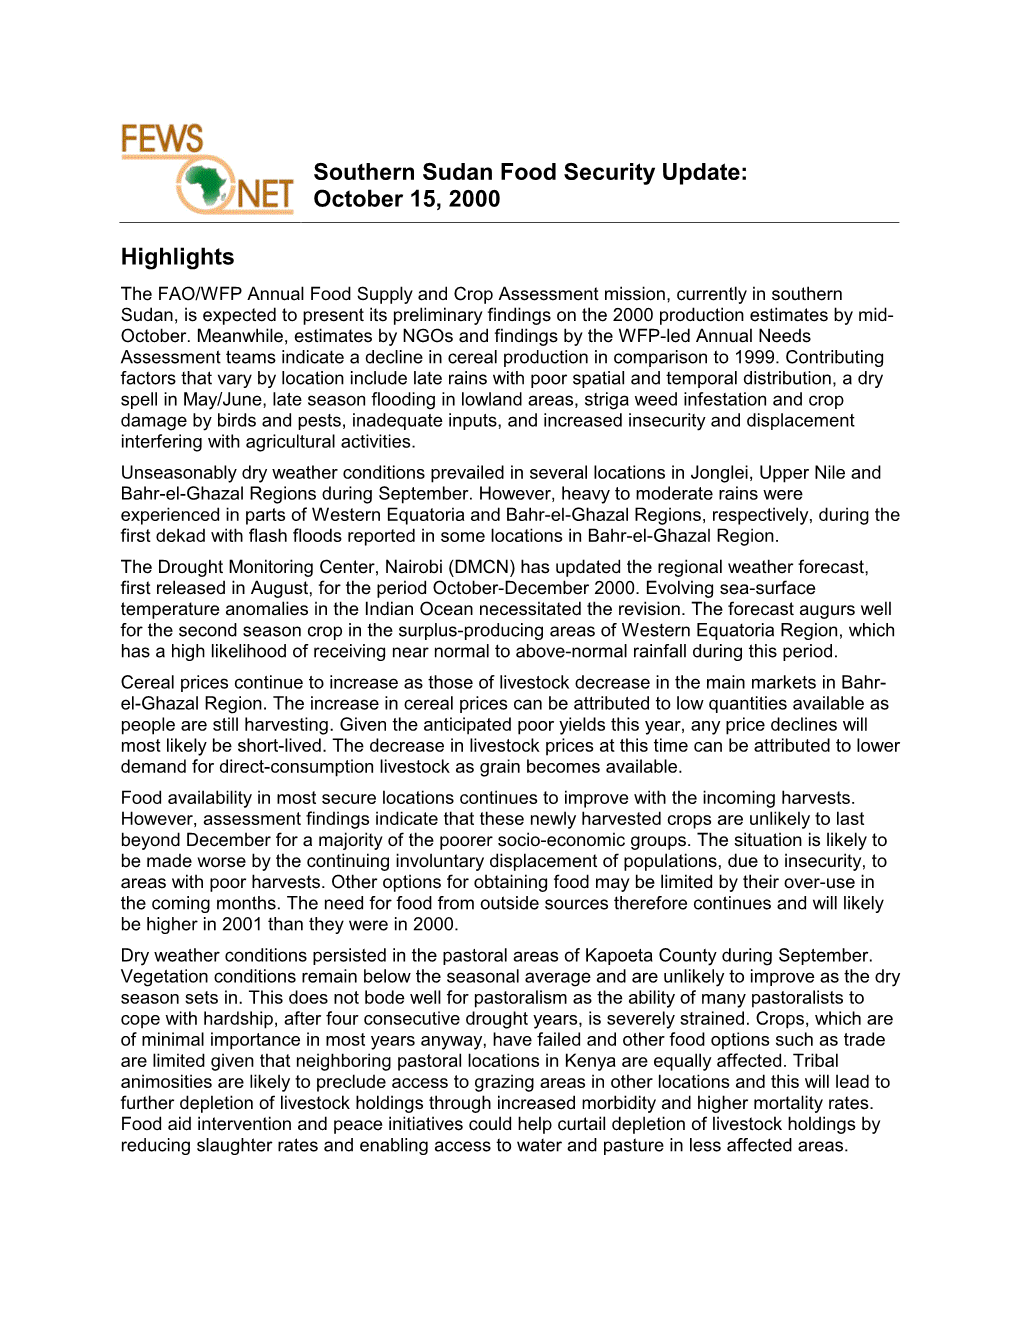 Highlights Southern Sudan Food Security Update: October 15, 2000